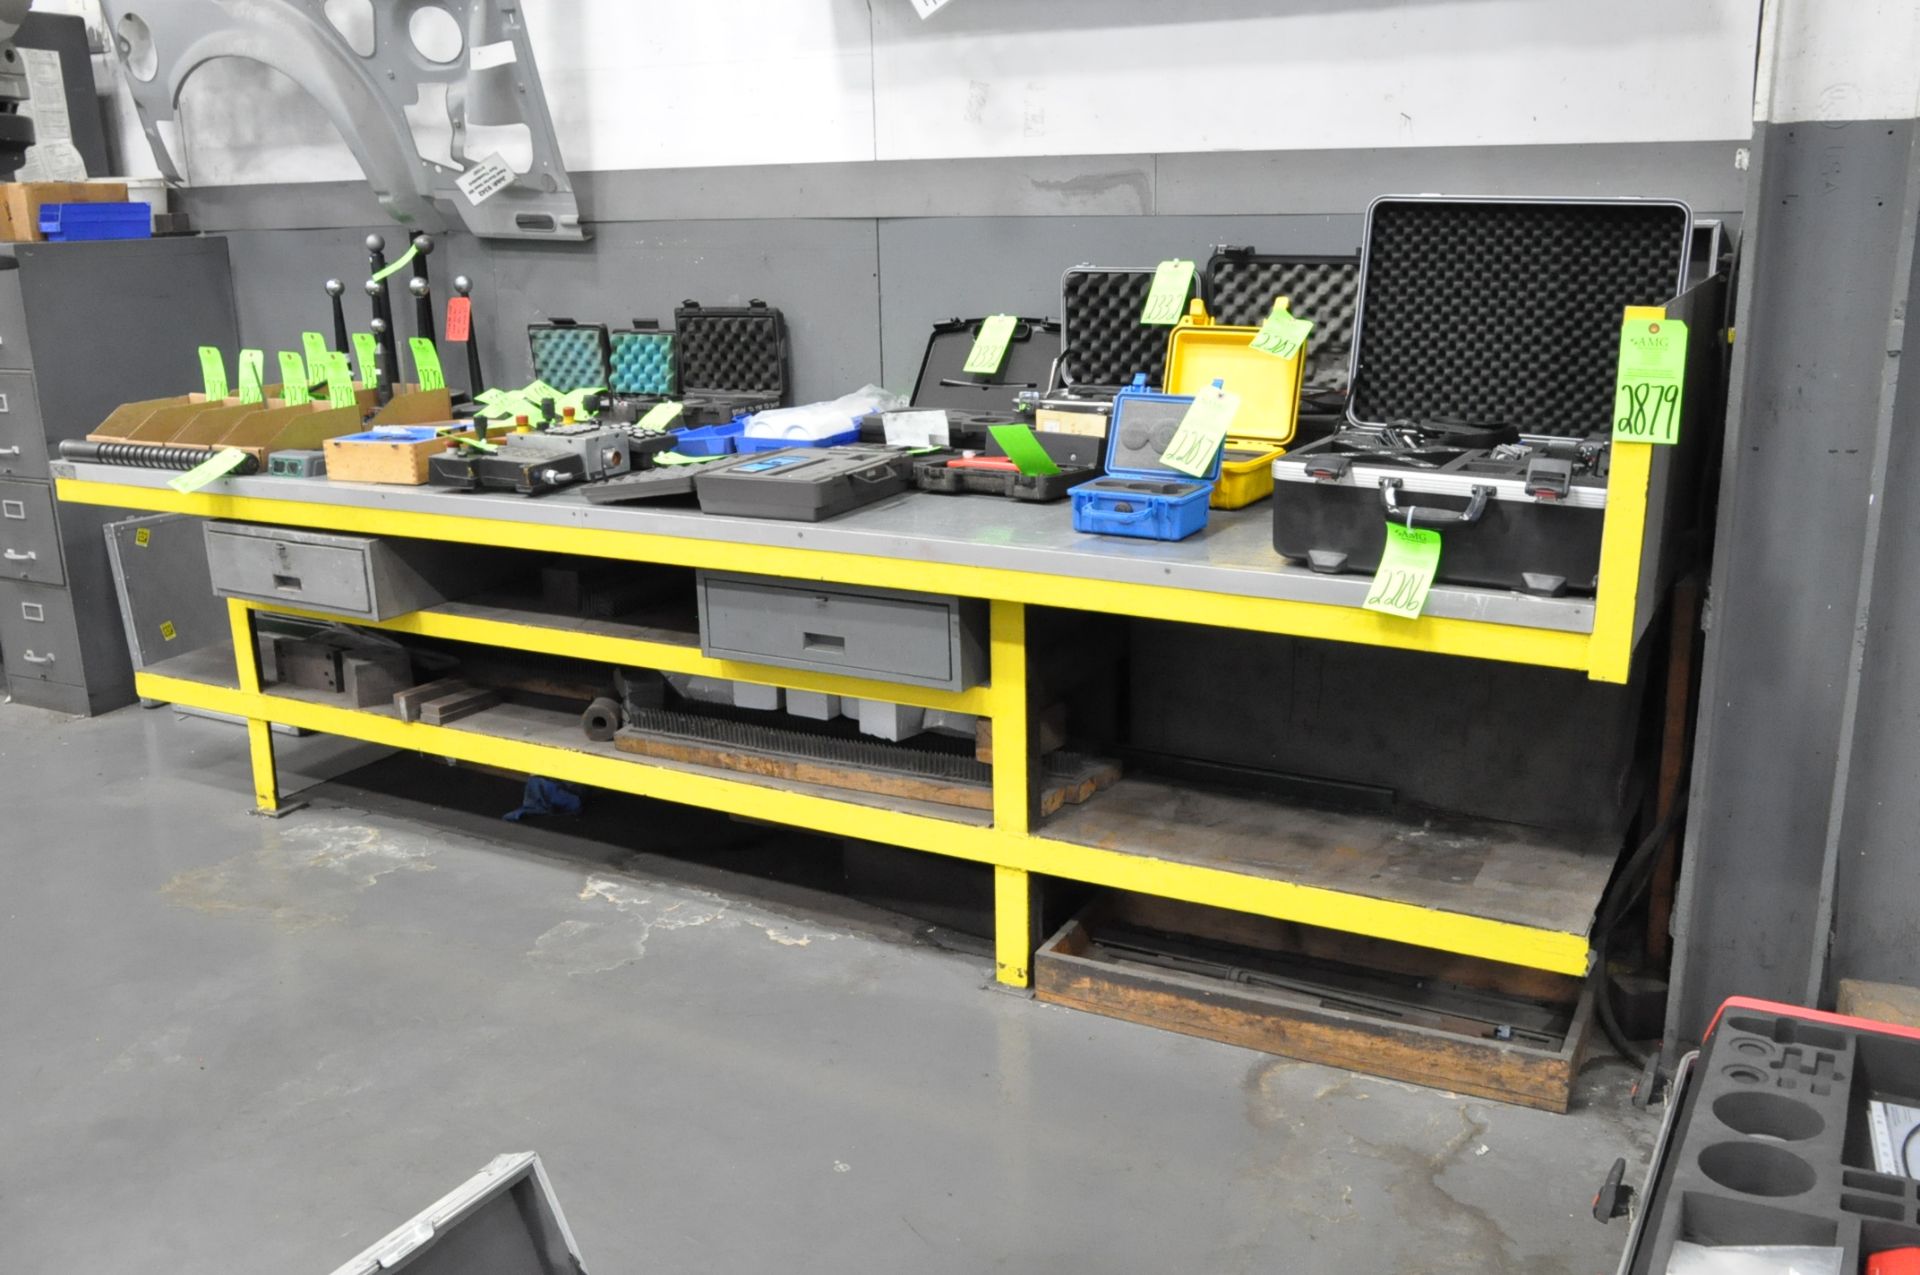 Lot-(5) Steel Work Tables and (1) Shelving Unit, (E-5), (Green Tag) - Image 3 of 3